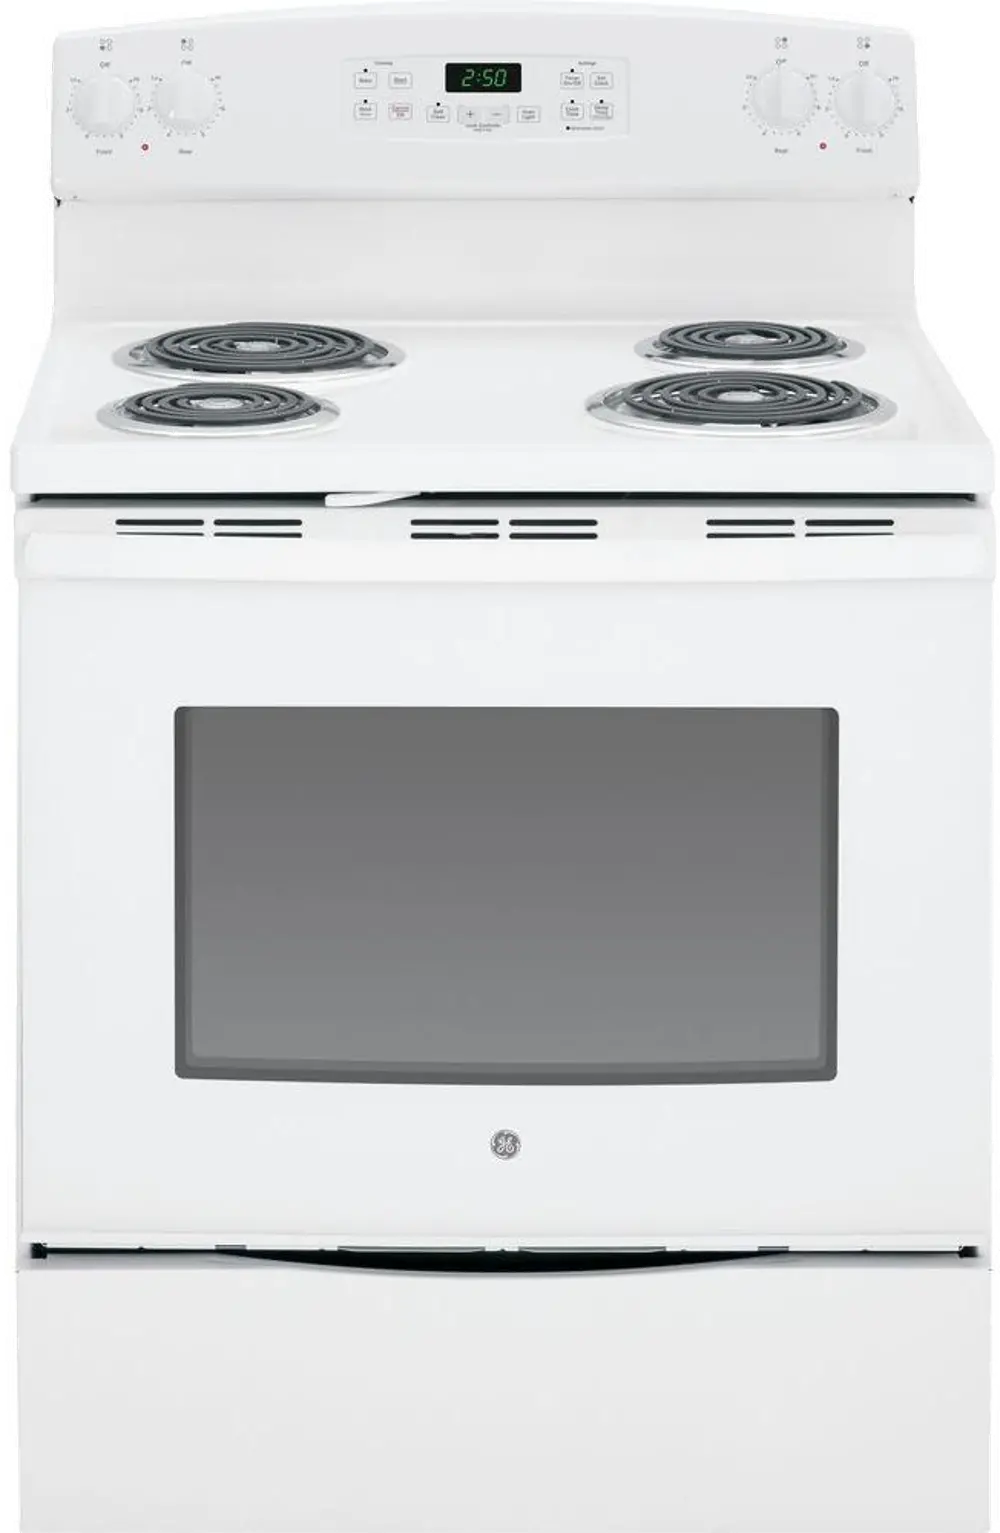 JB250DFWW GE 5.3 cu. ft. Electric Range with 4 coil burners - White-1